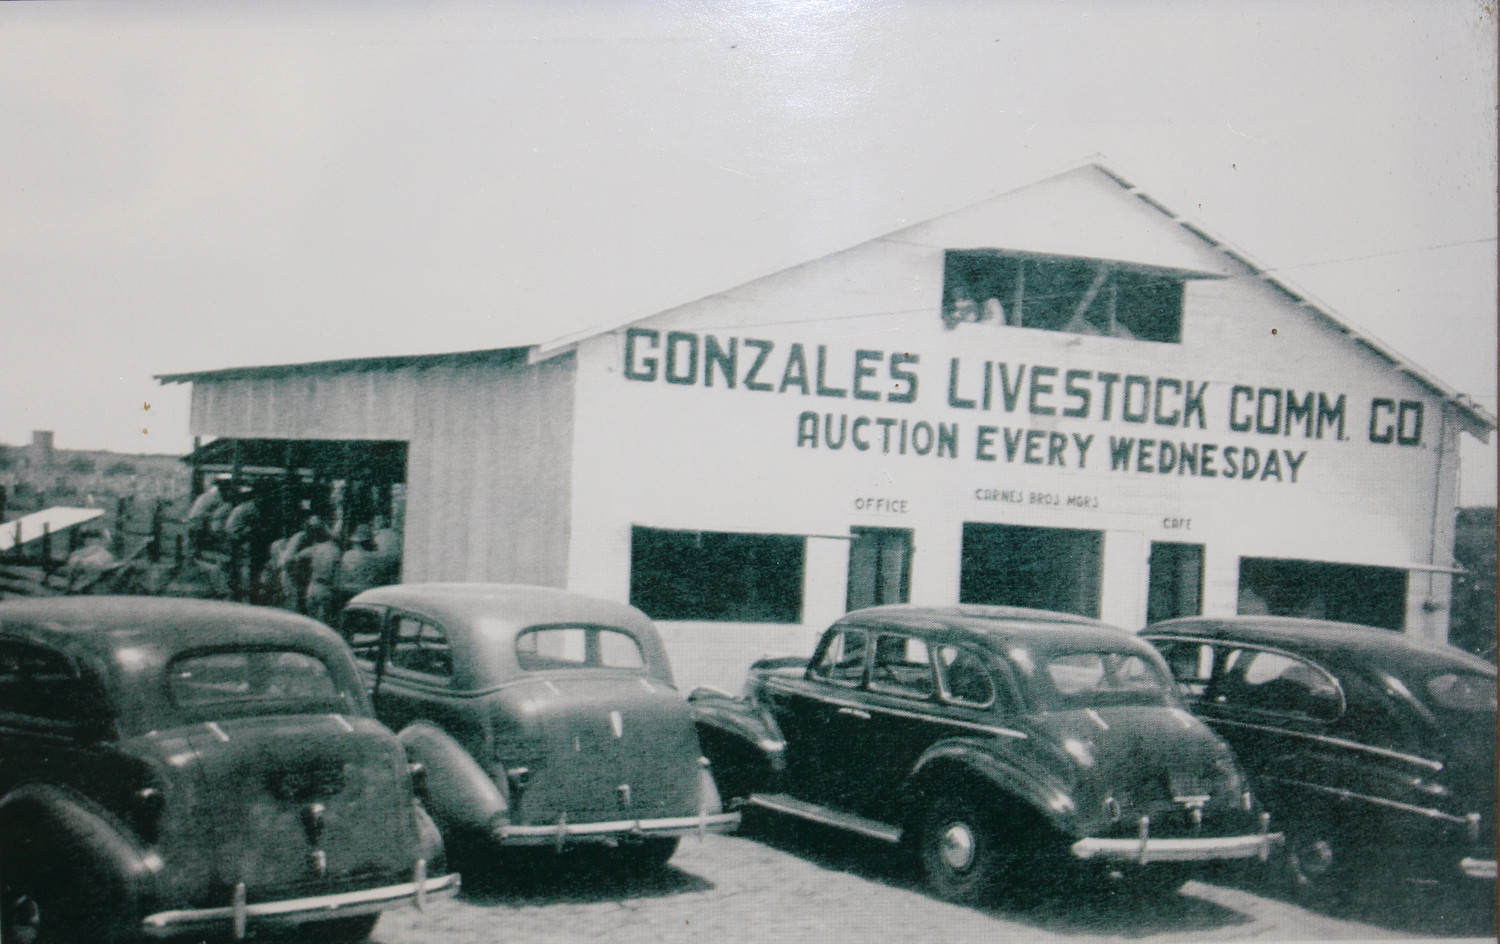 The original auction house was opened in 1940. Here is a picture of the operation circa 1940.